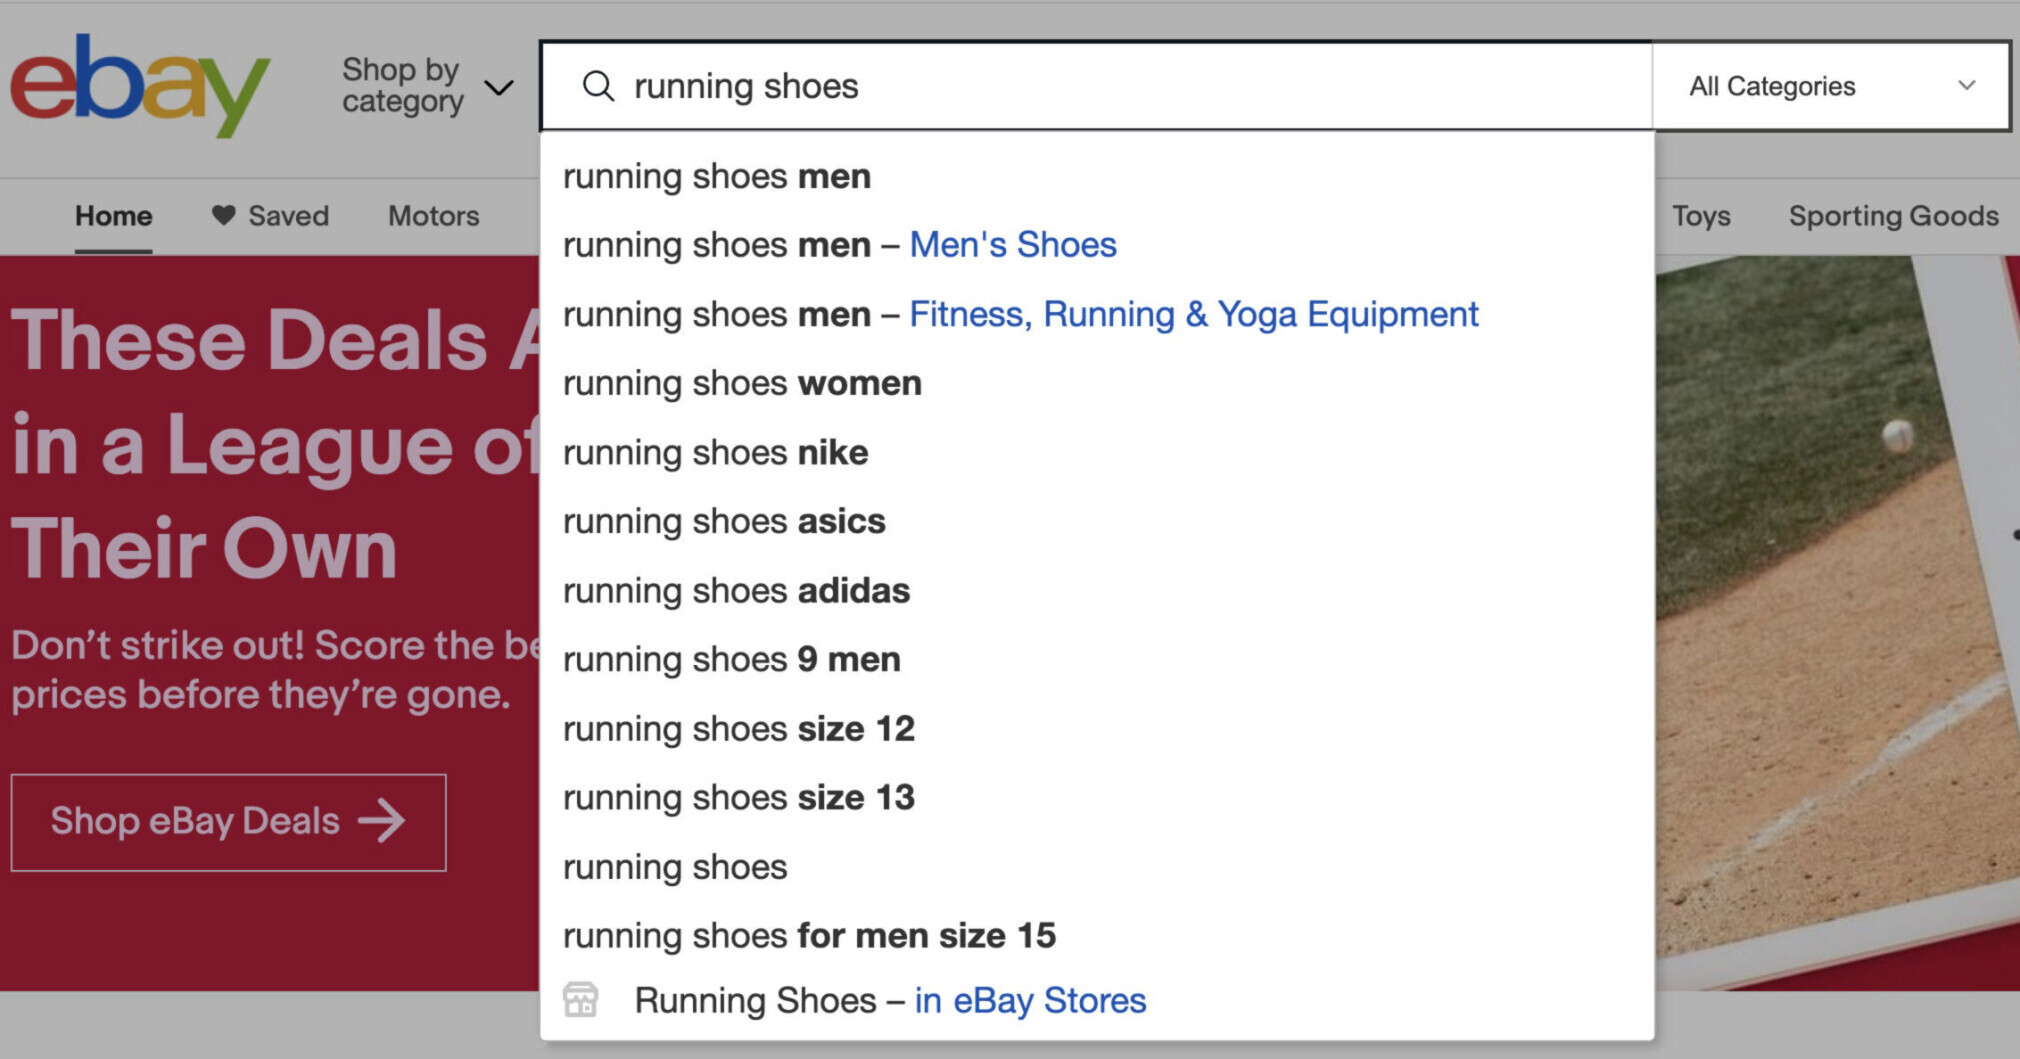 Ebay search suggestions for the keyword "running shoes"